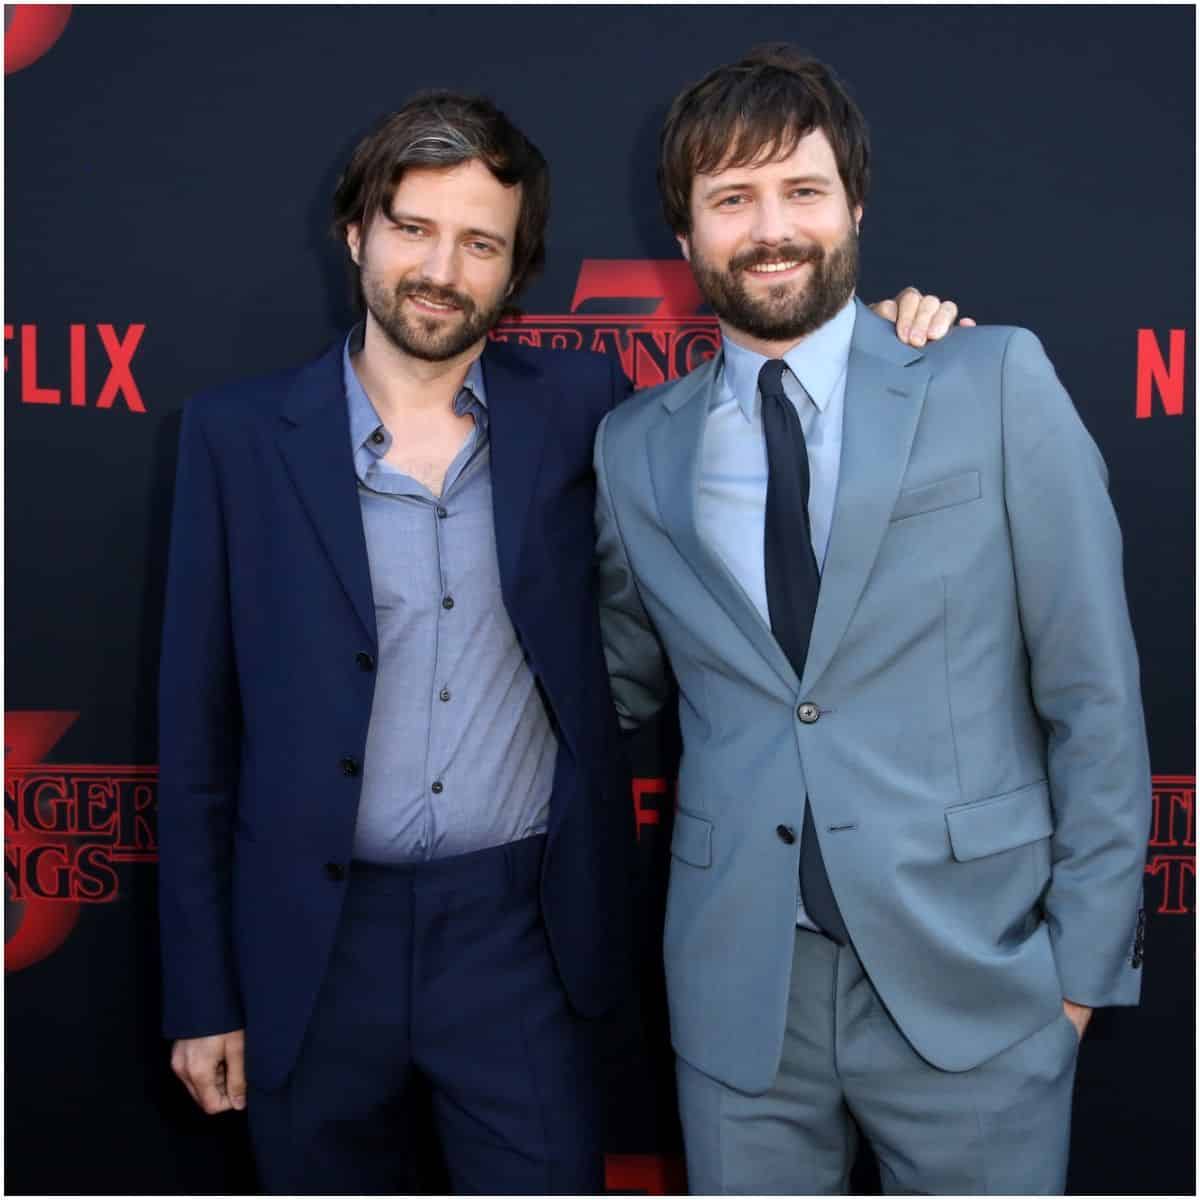 The Duffer Brothers Stranger Things